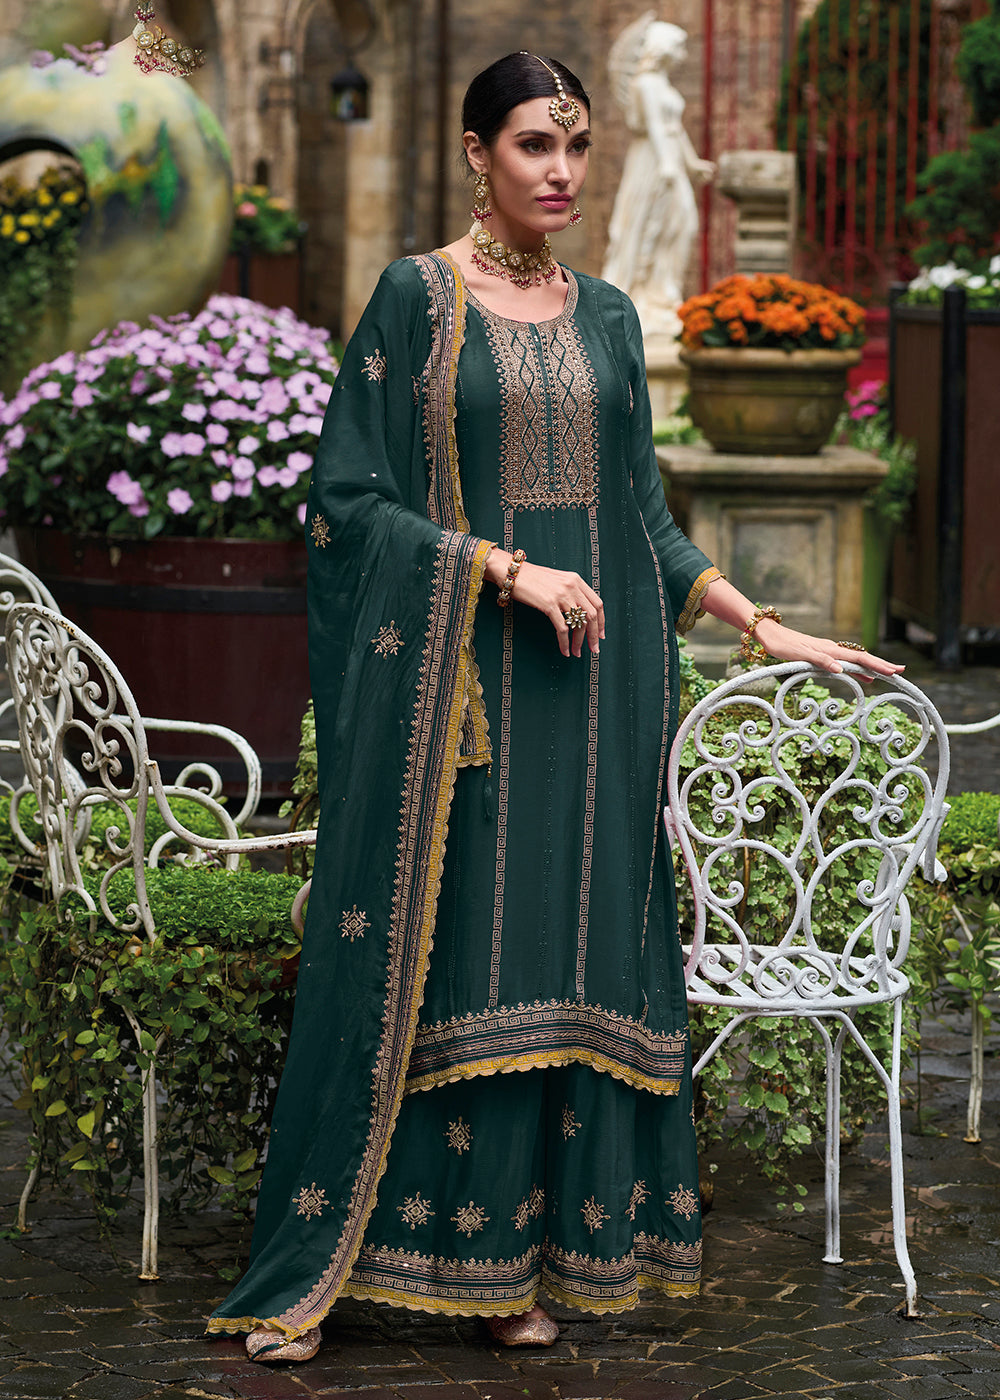 Buy Now Resham & Sequins Green Chinnon Party Wear Palazzo Suit Online in USA, UK, Canada, Germany, Australia & Worldwide at Empress Clothing.